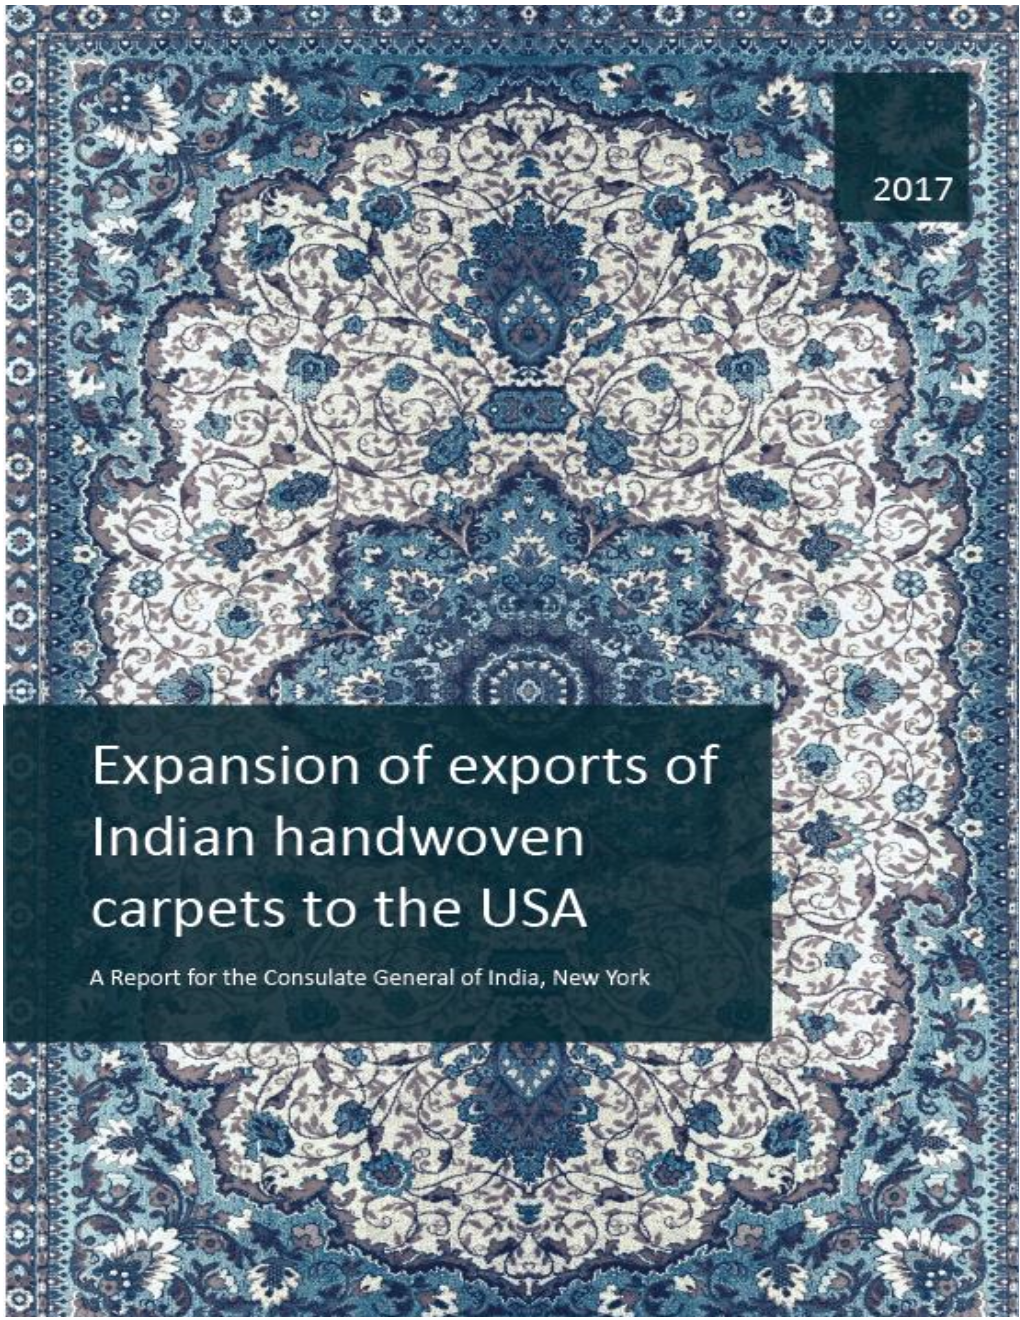 Report on Expansion of Exports of Indian Handwoven Carpets To